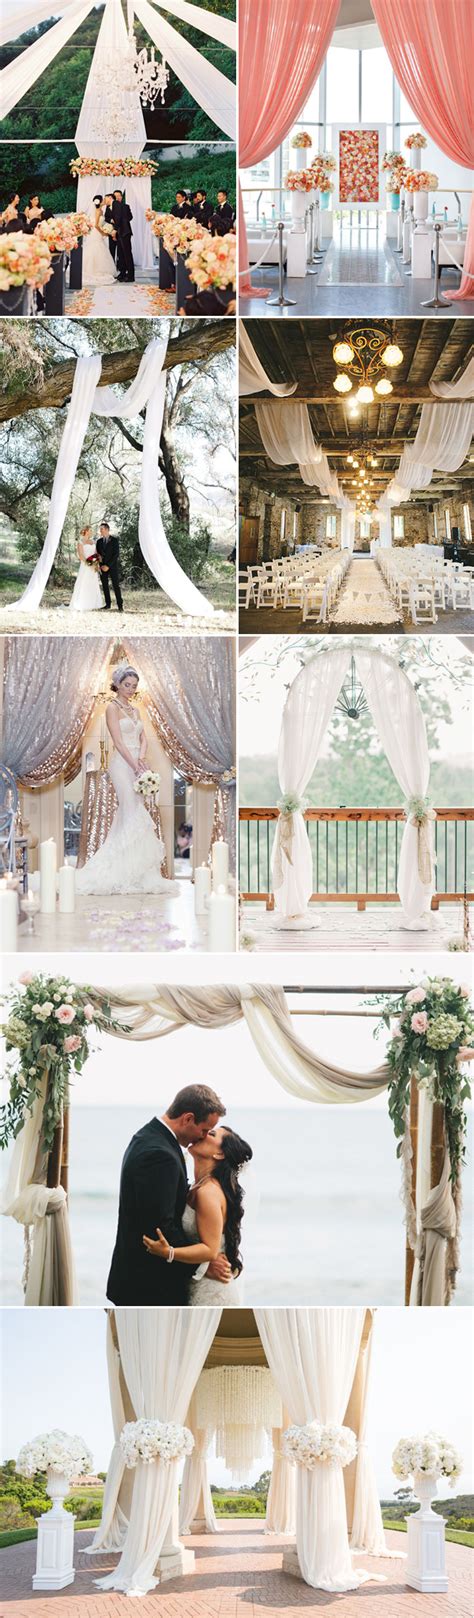 Here are a few wedding decoration ideas that are low maintenance, but beautiful and impactful. 36 Romantic Drapery Wedding Decorations Ideas | Deer Pearl ...